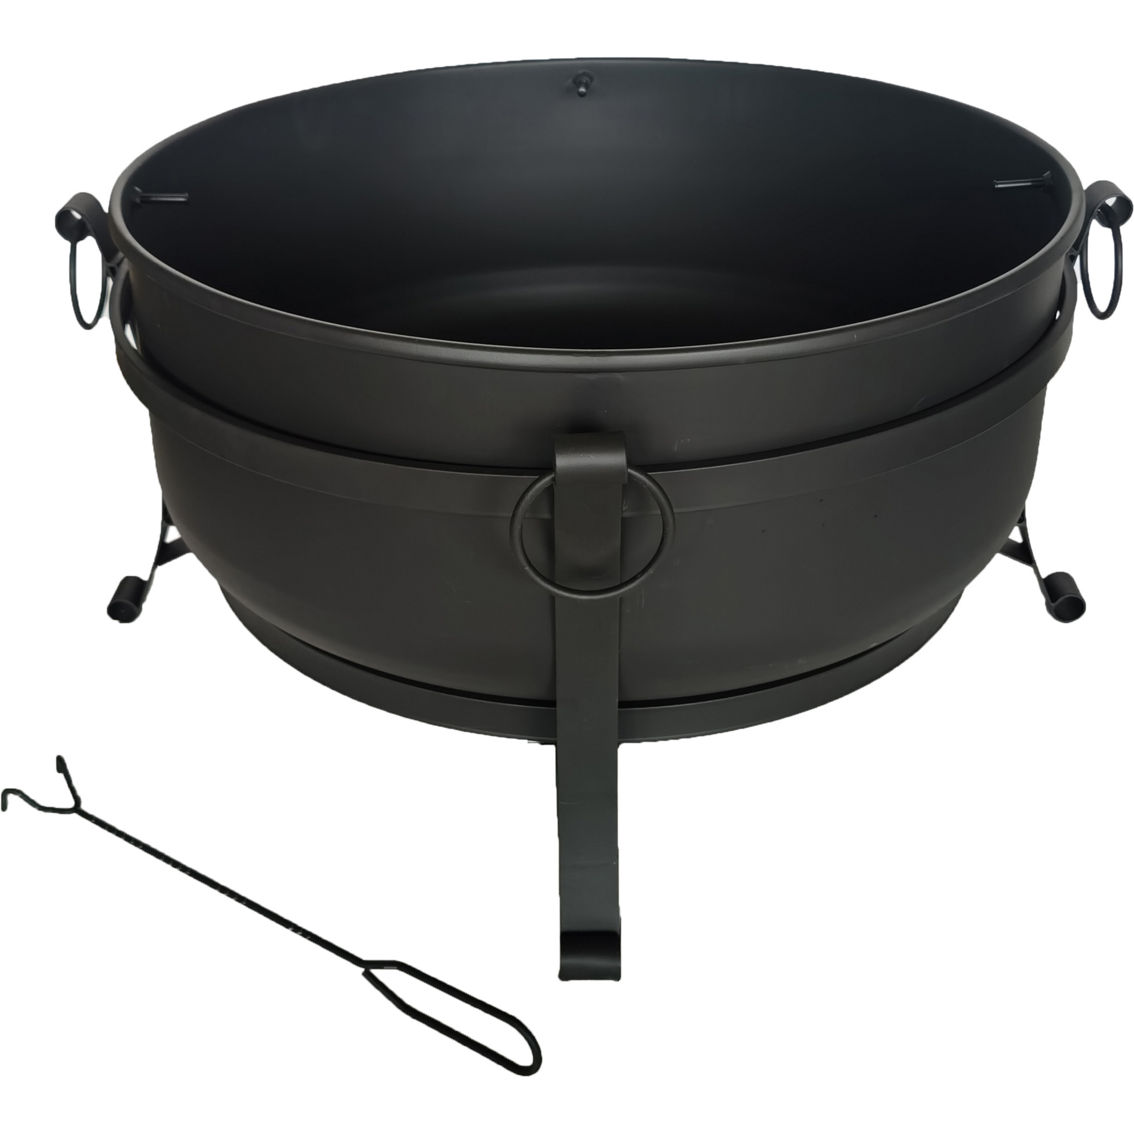 Chard 30 in. Round Cauldron Fire Pit with Spark Screen - Image 3 of 3